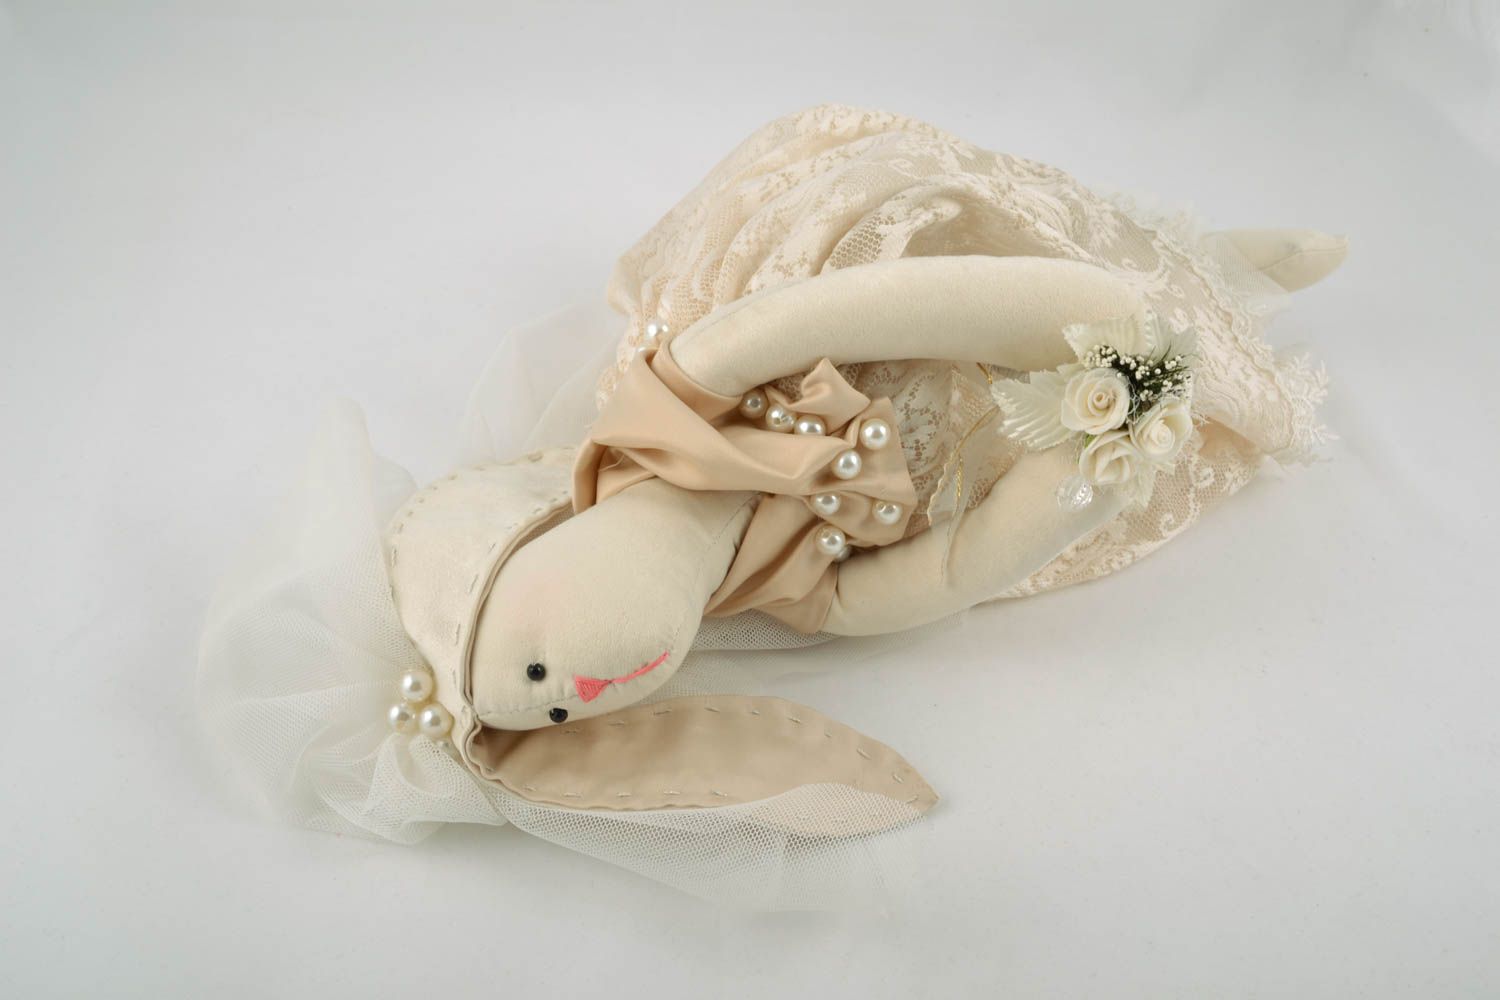 Homemade soft toy Bunny in Dress photo 1